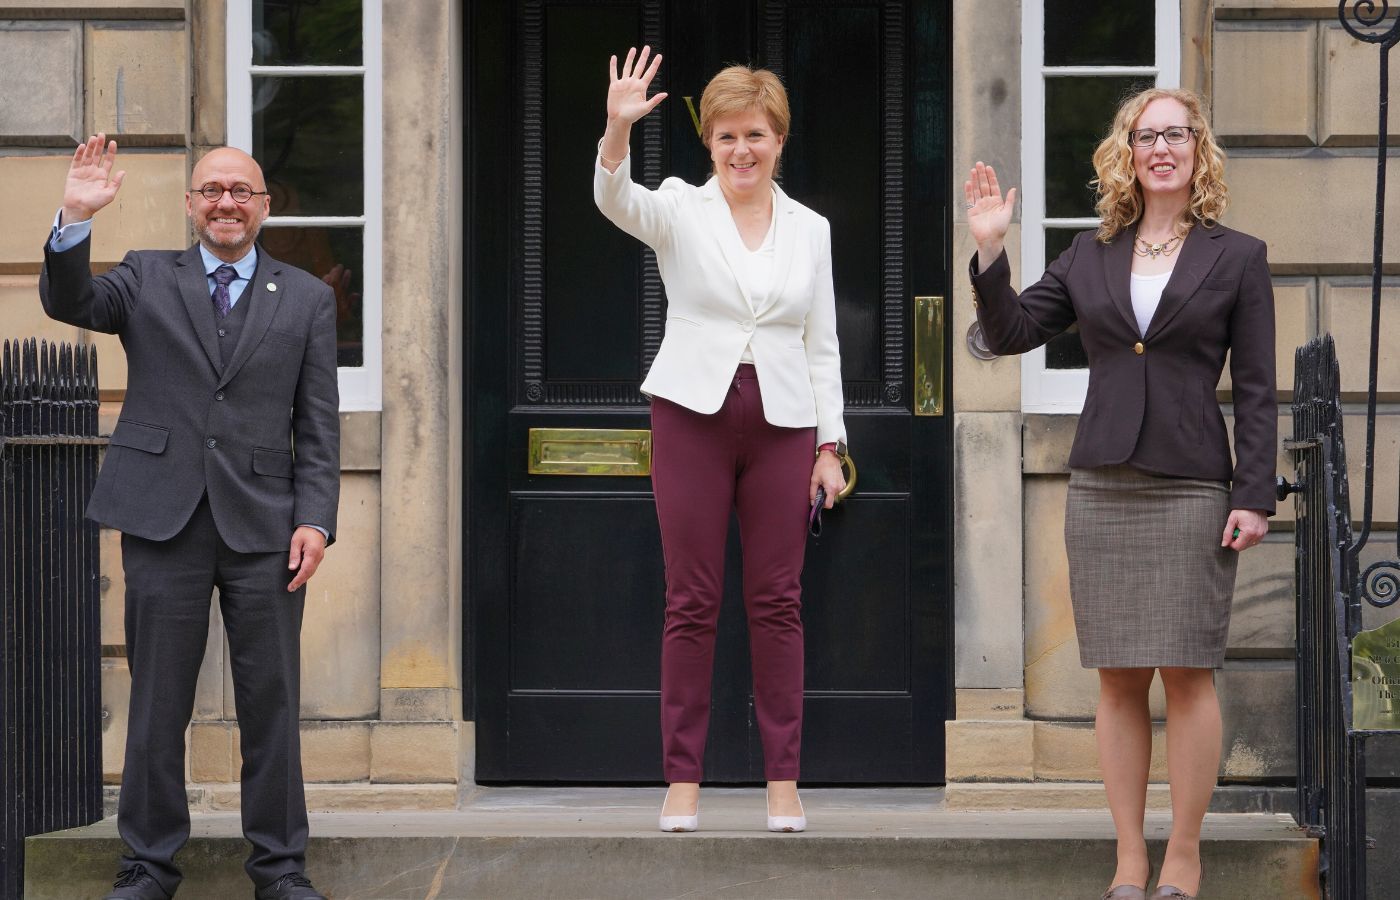 Patrick Harvie, Nicola Sturgeon and Lorna Slater following the signing of the Bute House Agreement.